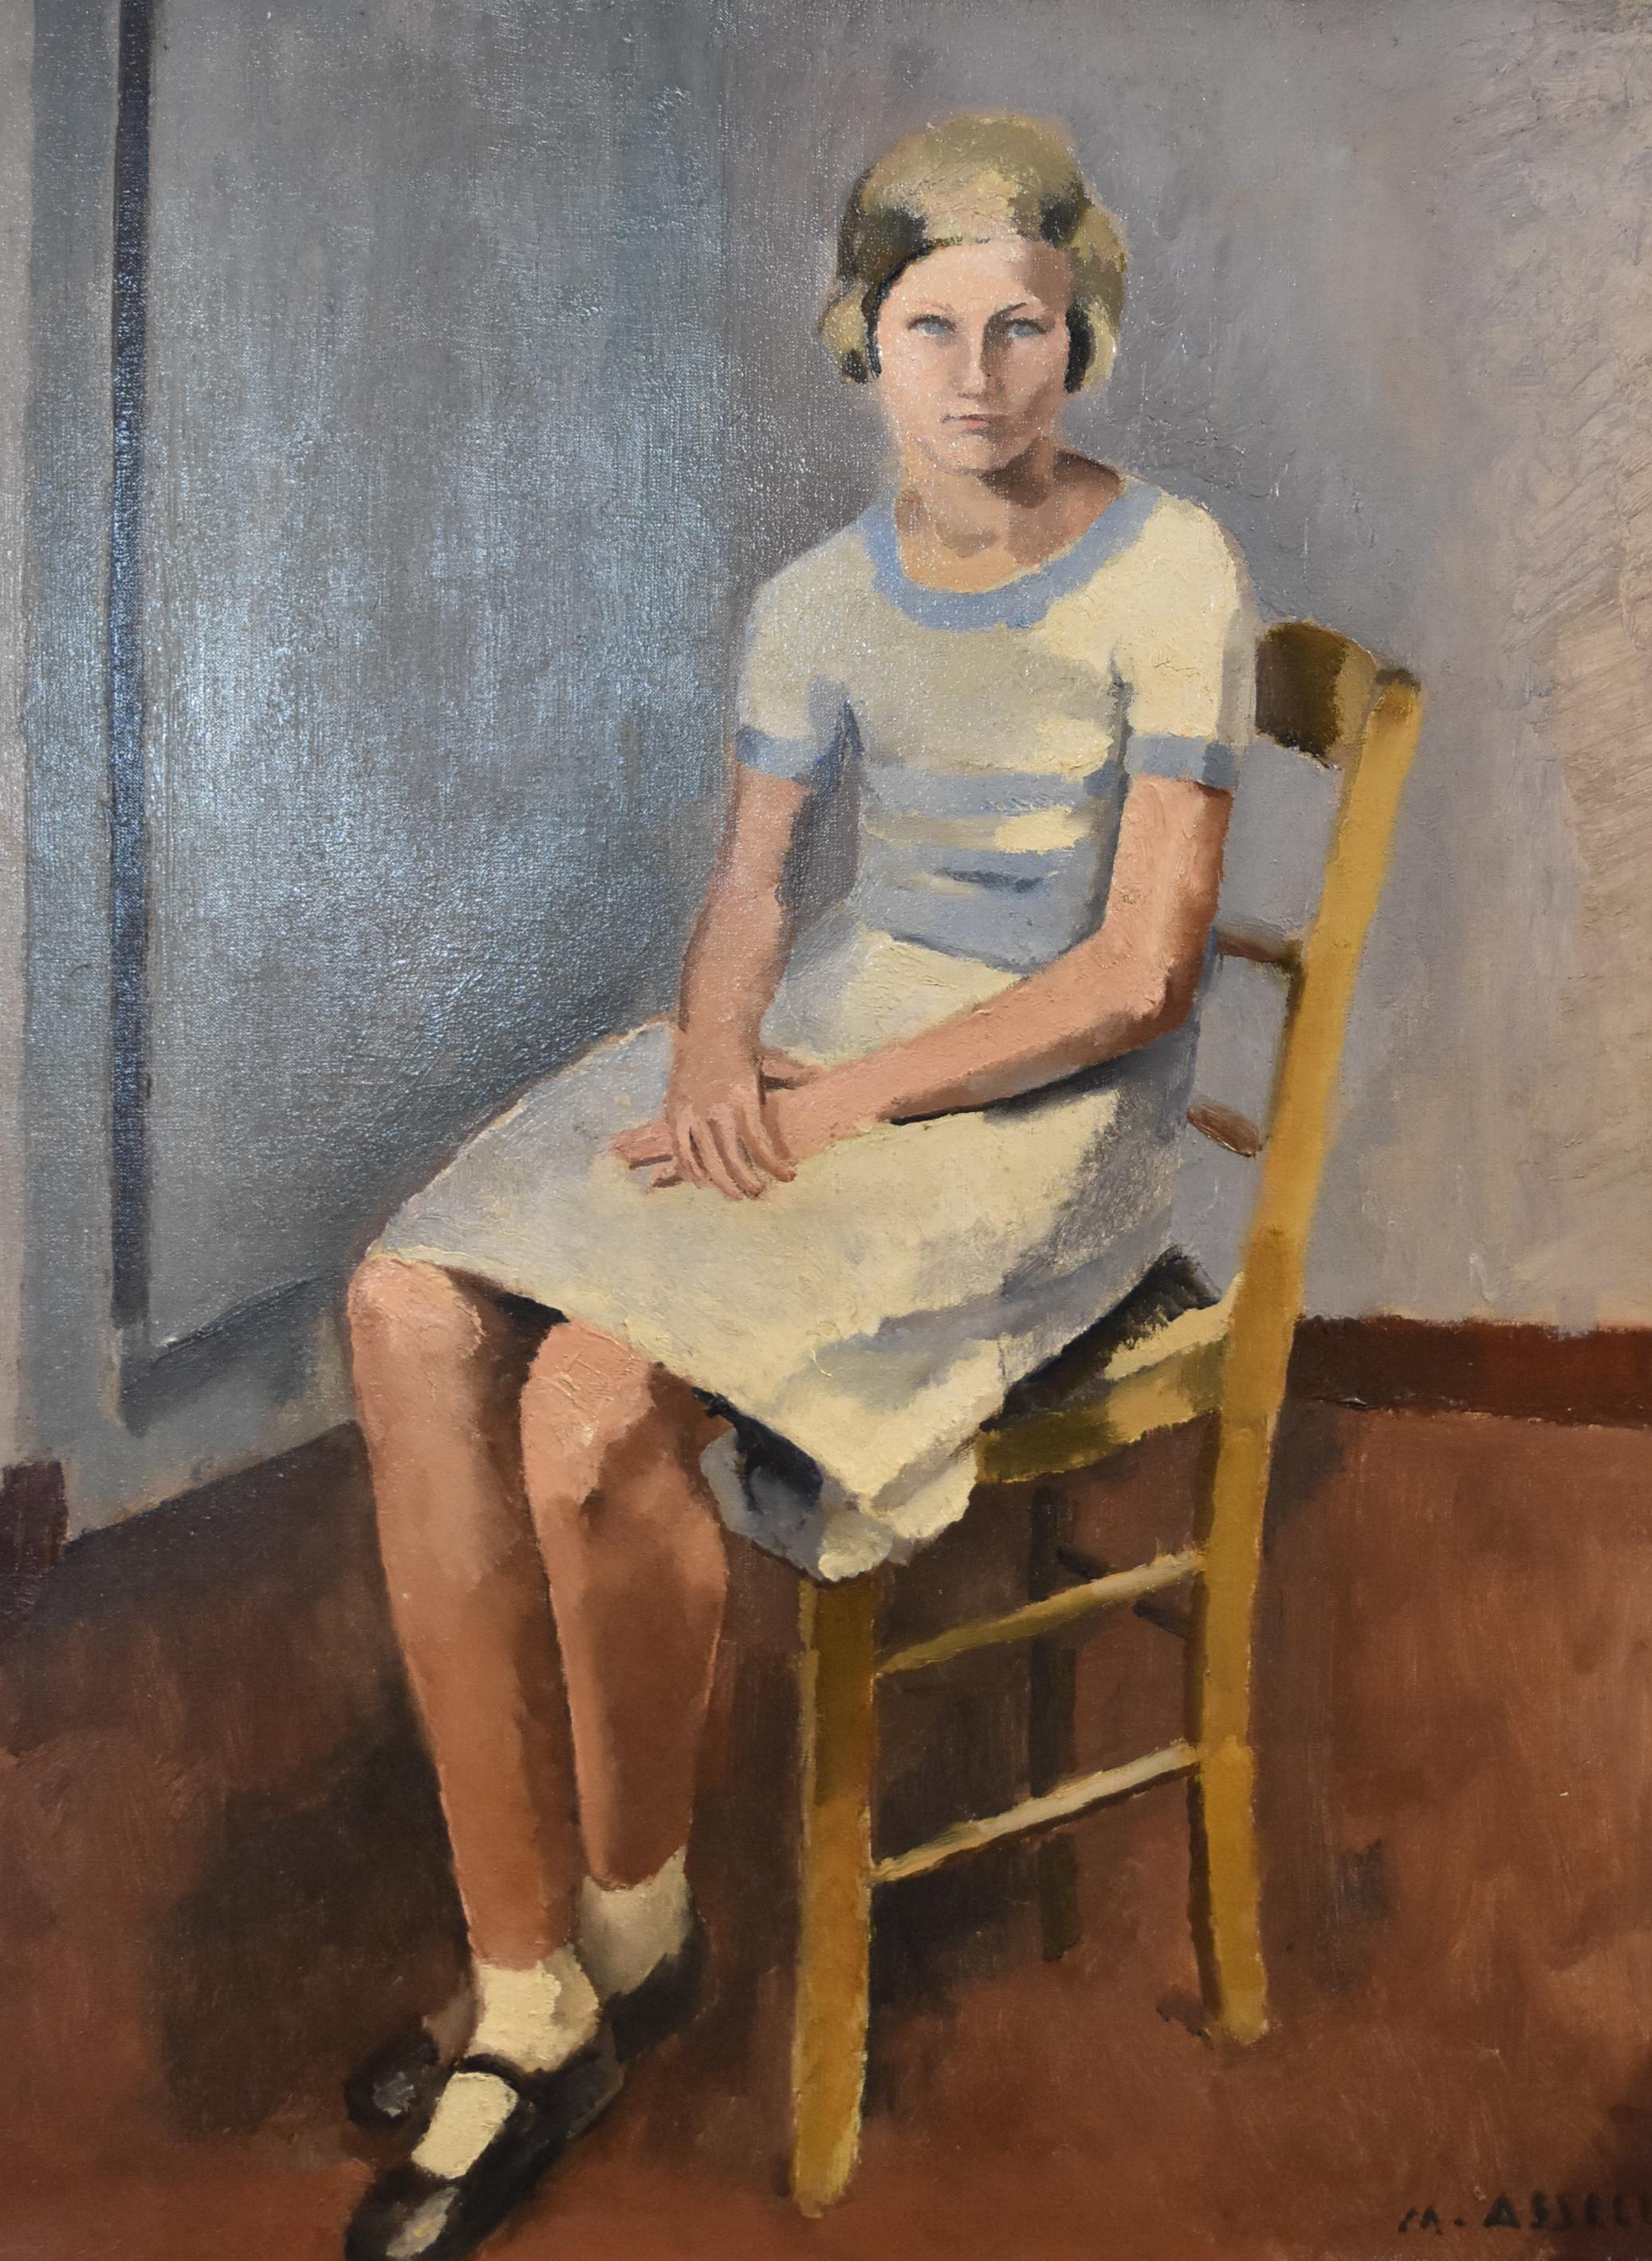 Maurice Asselin (1882-1947) 
Jeune fille assise (Seated young girl)
Signed lower right
Oil on canvas.
Unframed
Titled on a label on the reverse, indicating also a number and the mention of an exhibition in Switzerlzand ("Exp Suisse")

Maurice